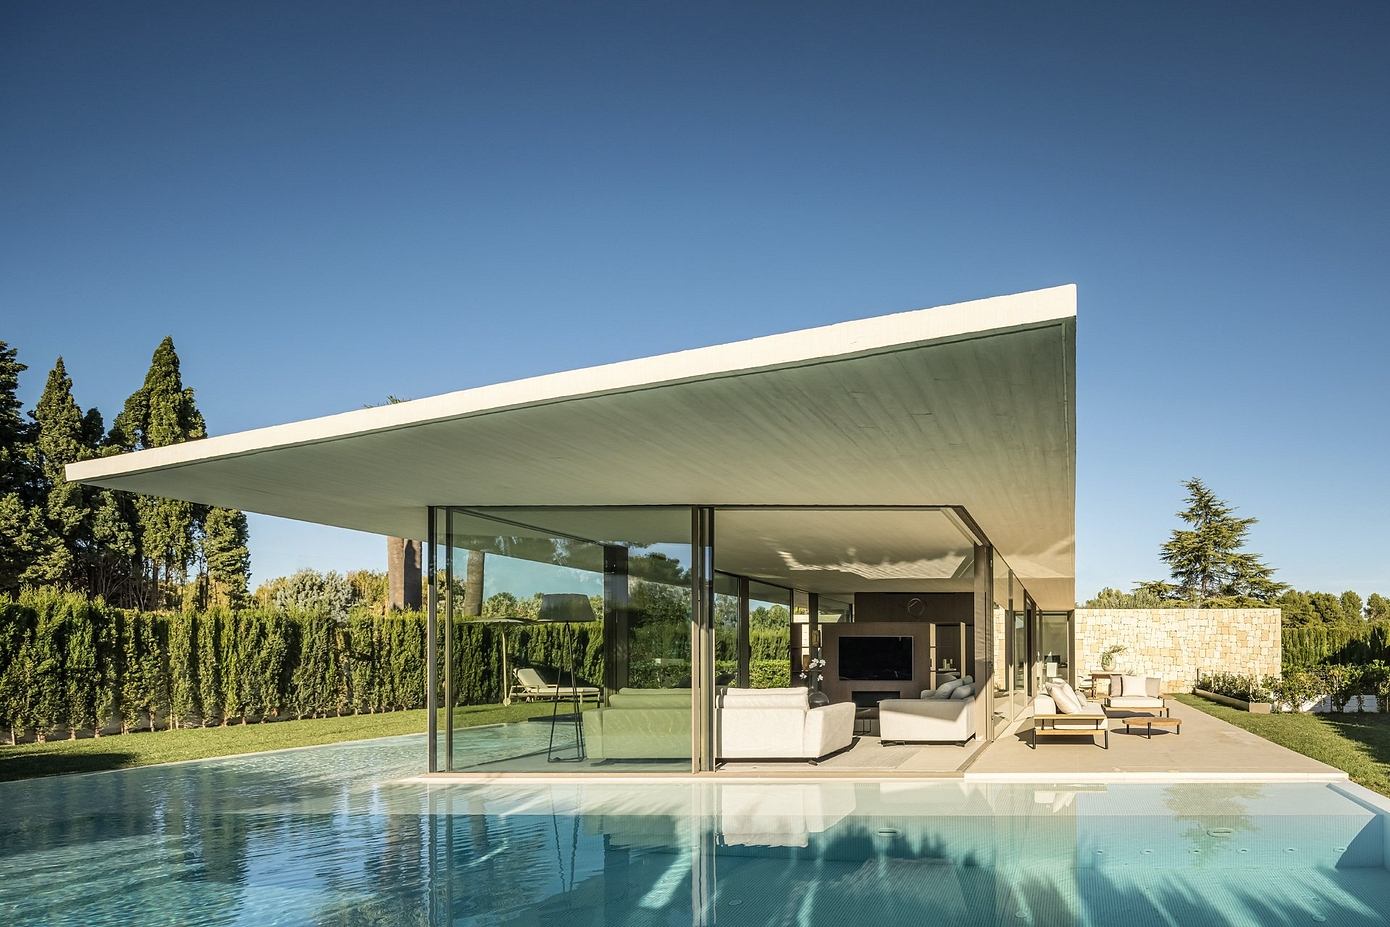 The Mass and the Ether: A Modern Home Among Valencia’s Orange Trees